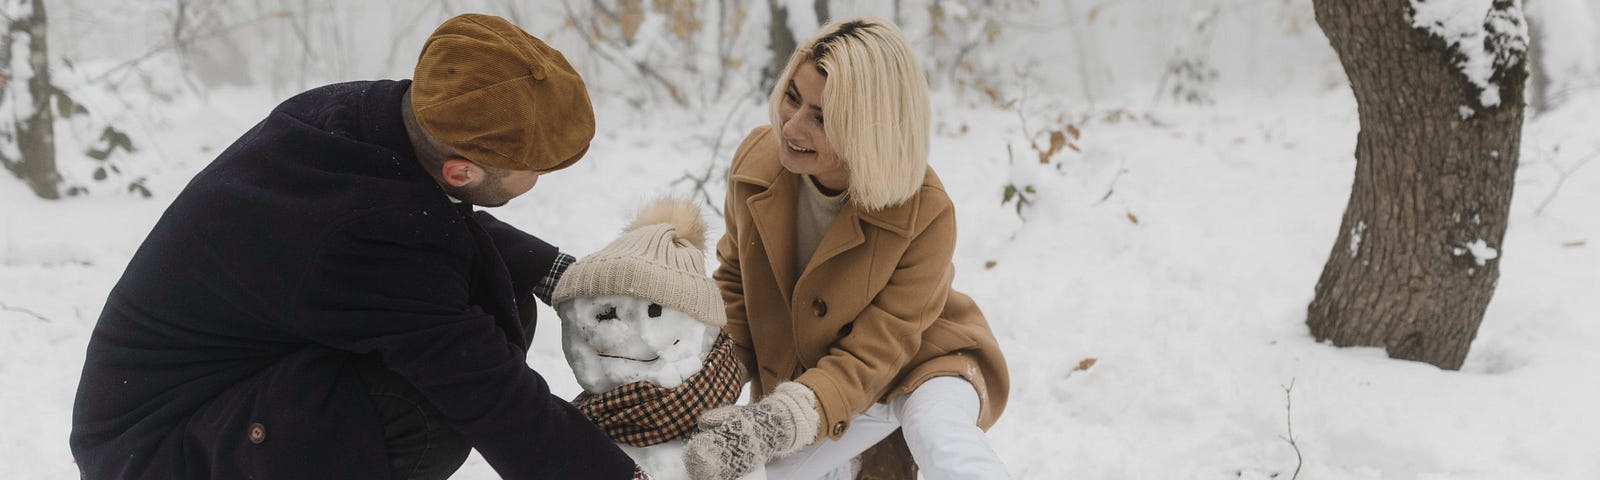 A couple builds a snowman in the cold